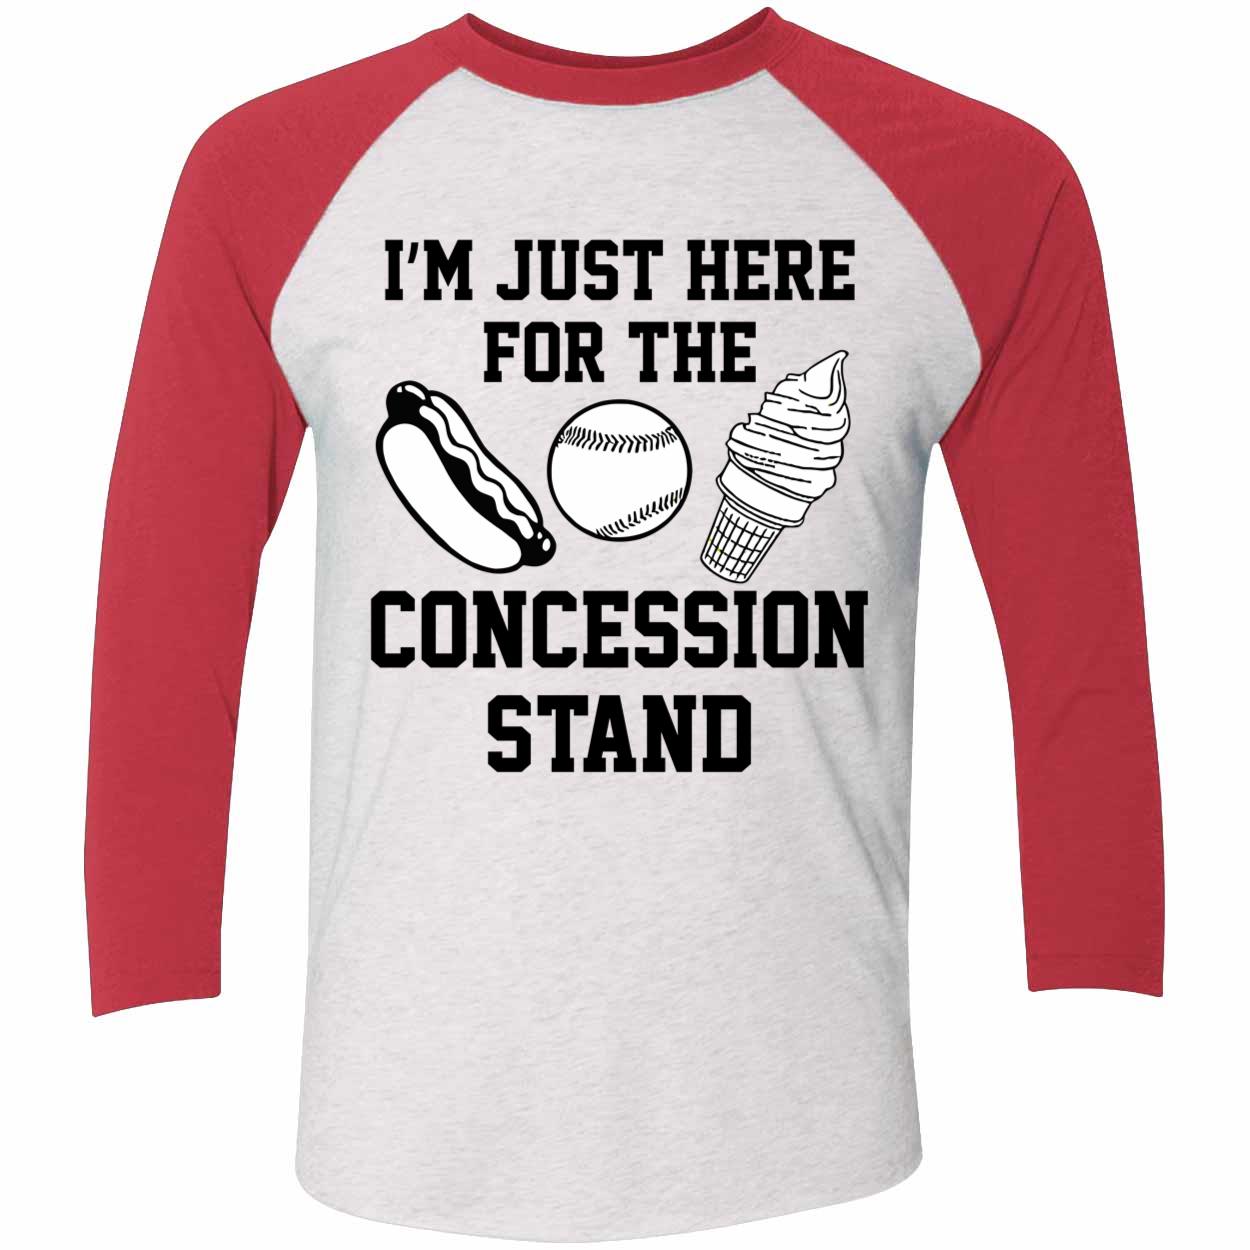 I’m Just Here For The Concession Stand Shirt - Endastore.com